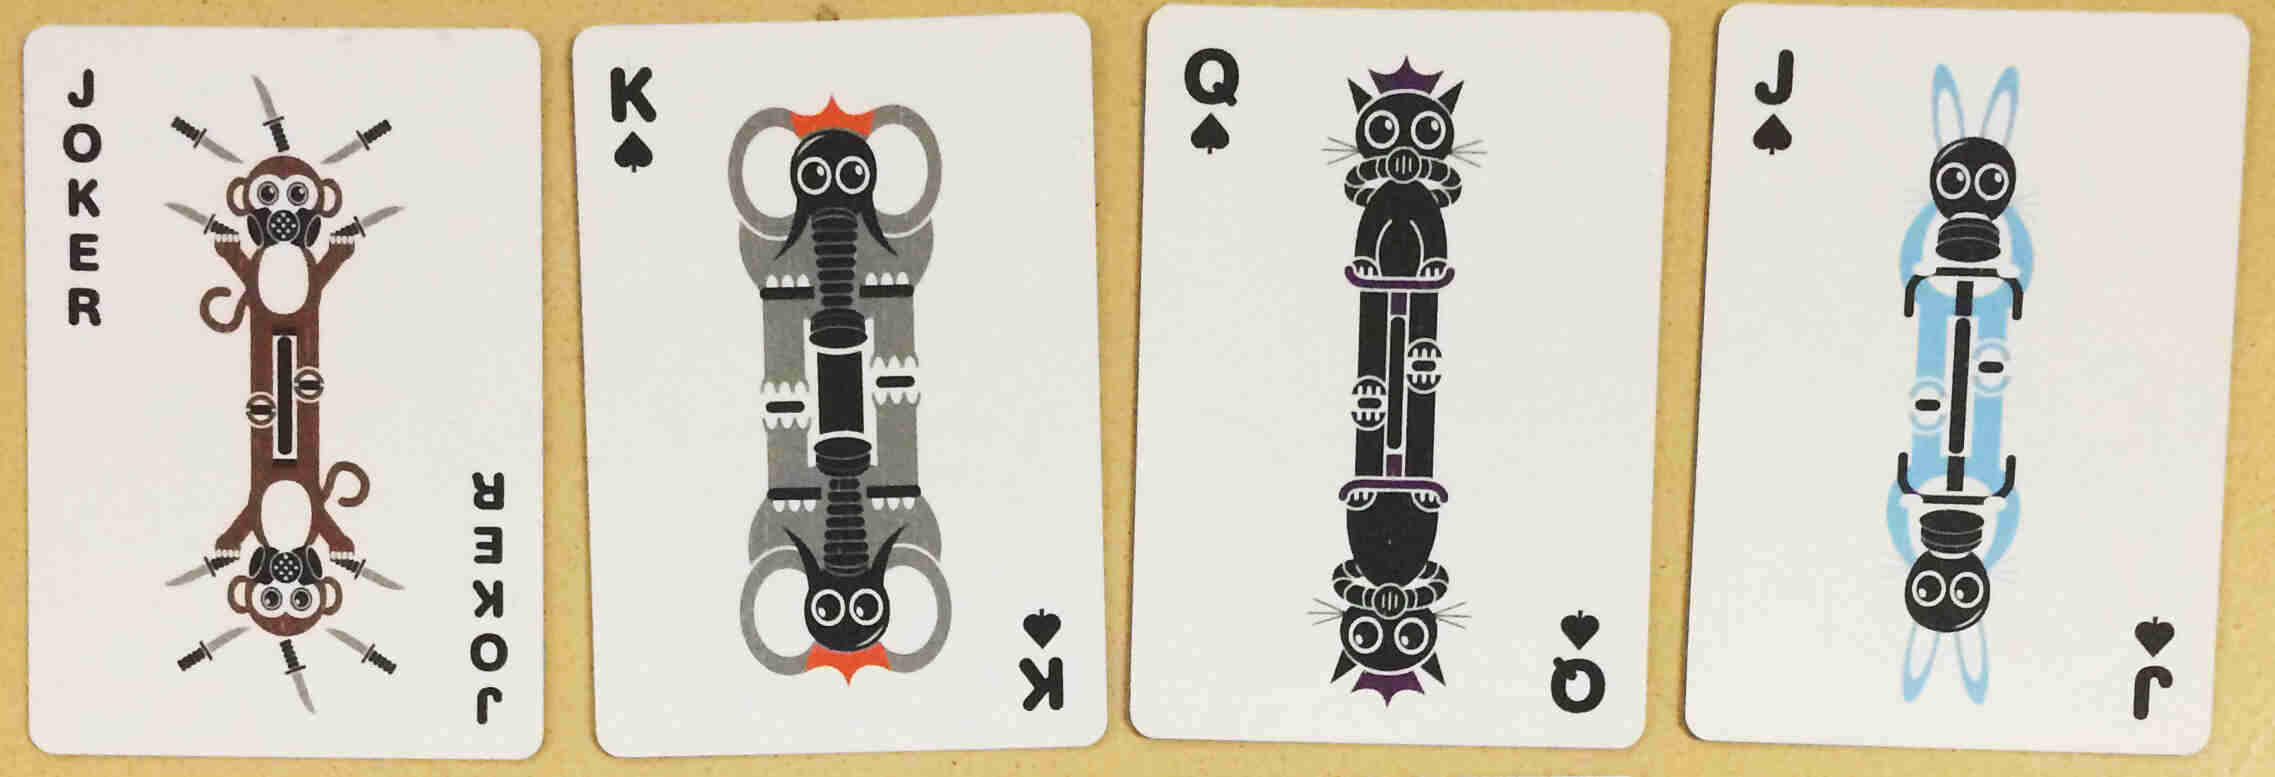 Downward view of two Surly playing cards - One is a Joker and the other a King of spades